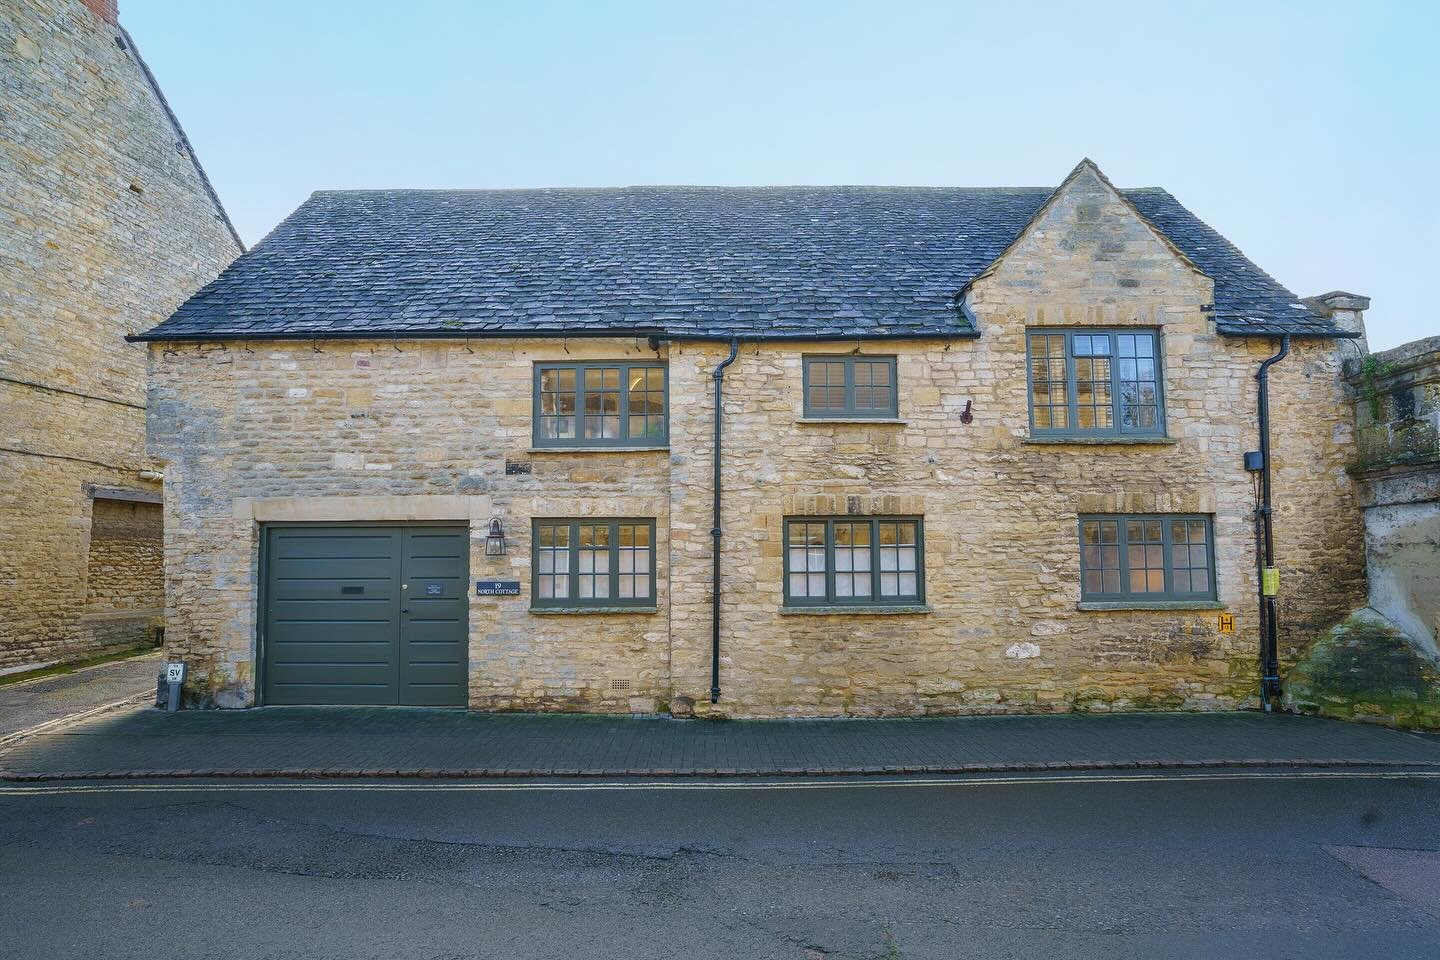 FOR SALE - Park Street, Woodstock 📍 

This one-of-a-kind property is now available and being offered to the open market. Situated in a more secluded part of town, North Cottage is a beautiful detached property set in its own private walled garden, e